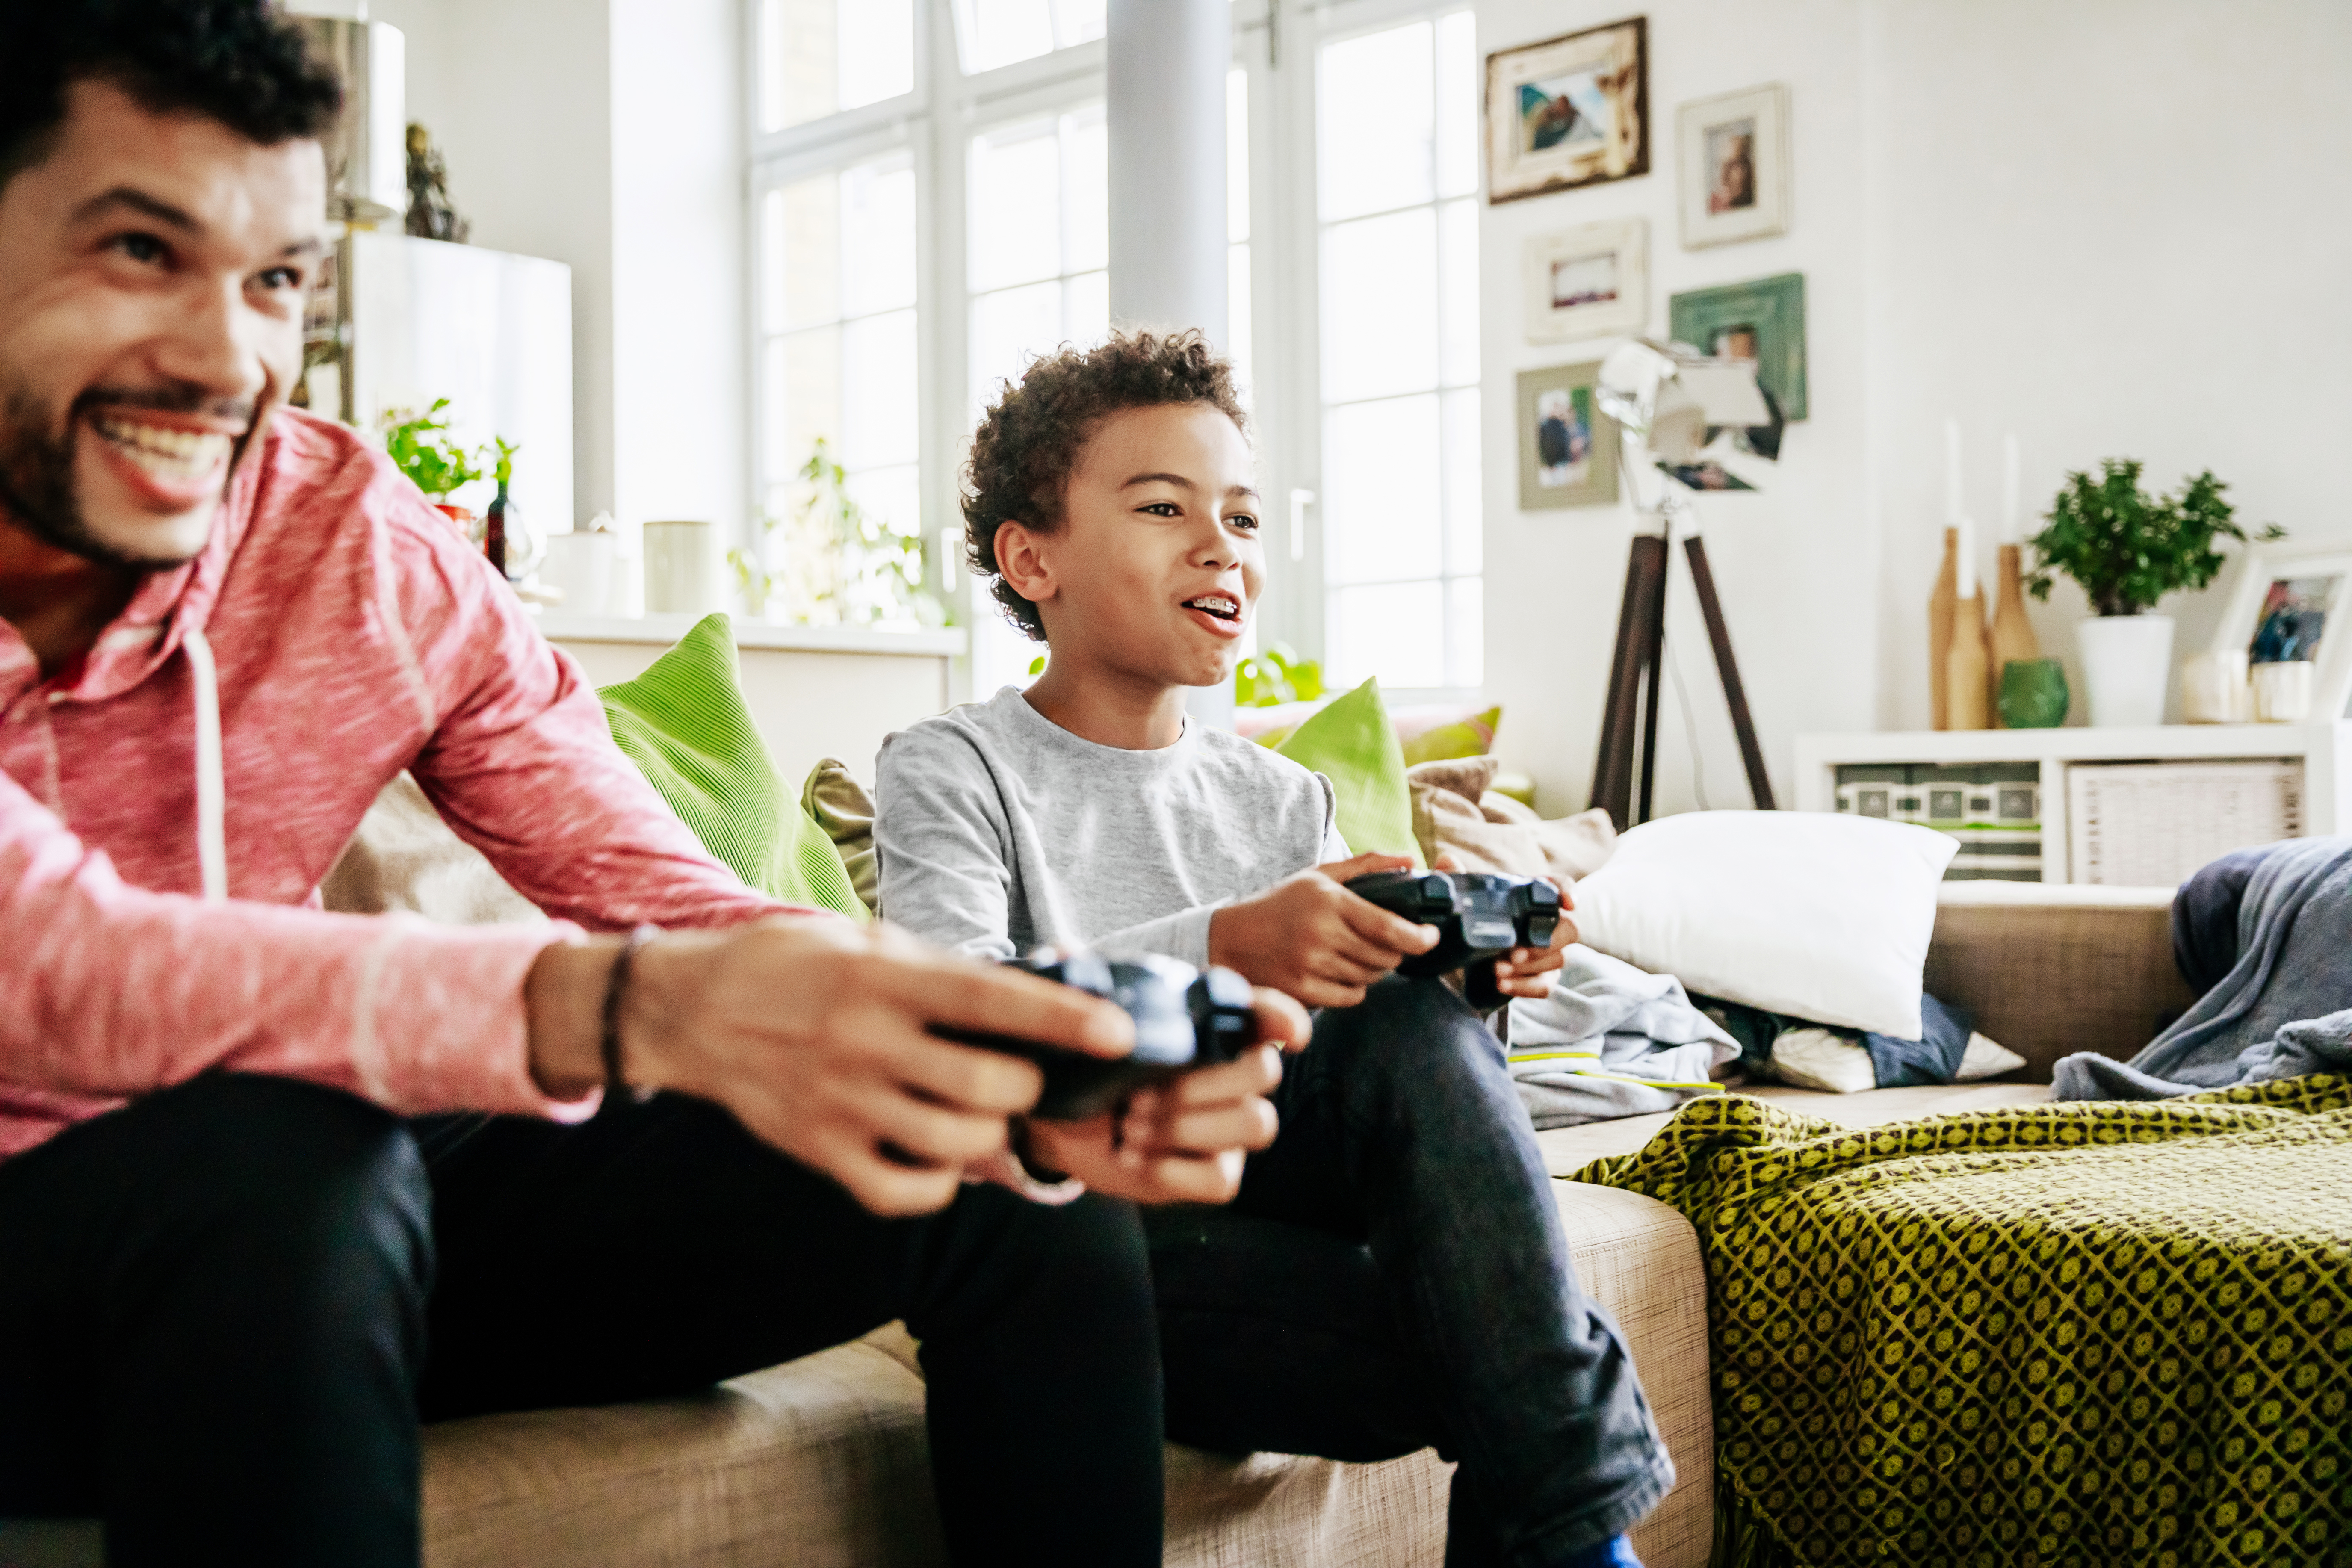 Young Boy Enjoying Himself Playing Video Games With Dad